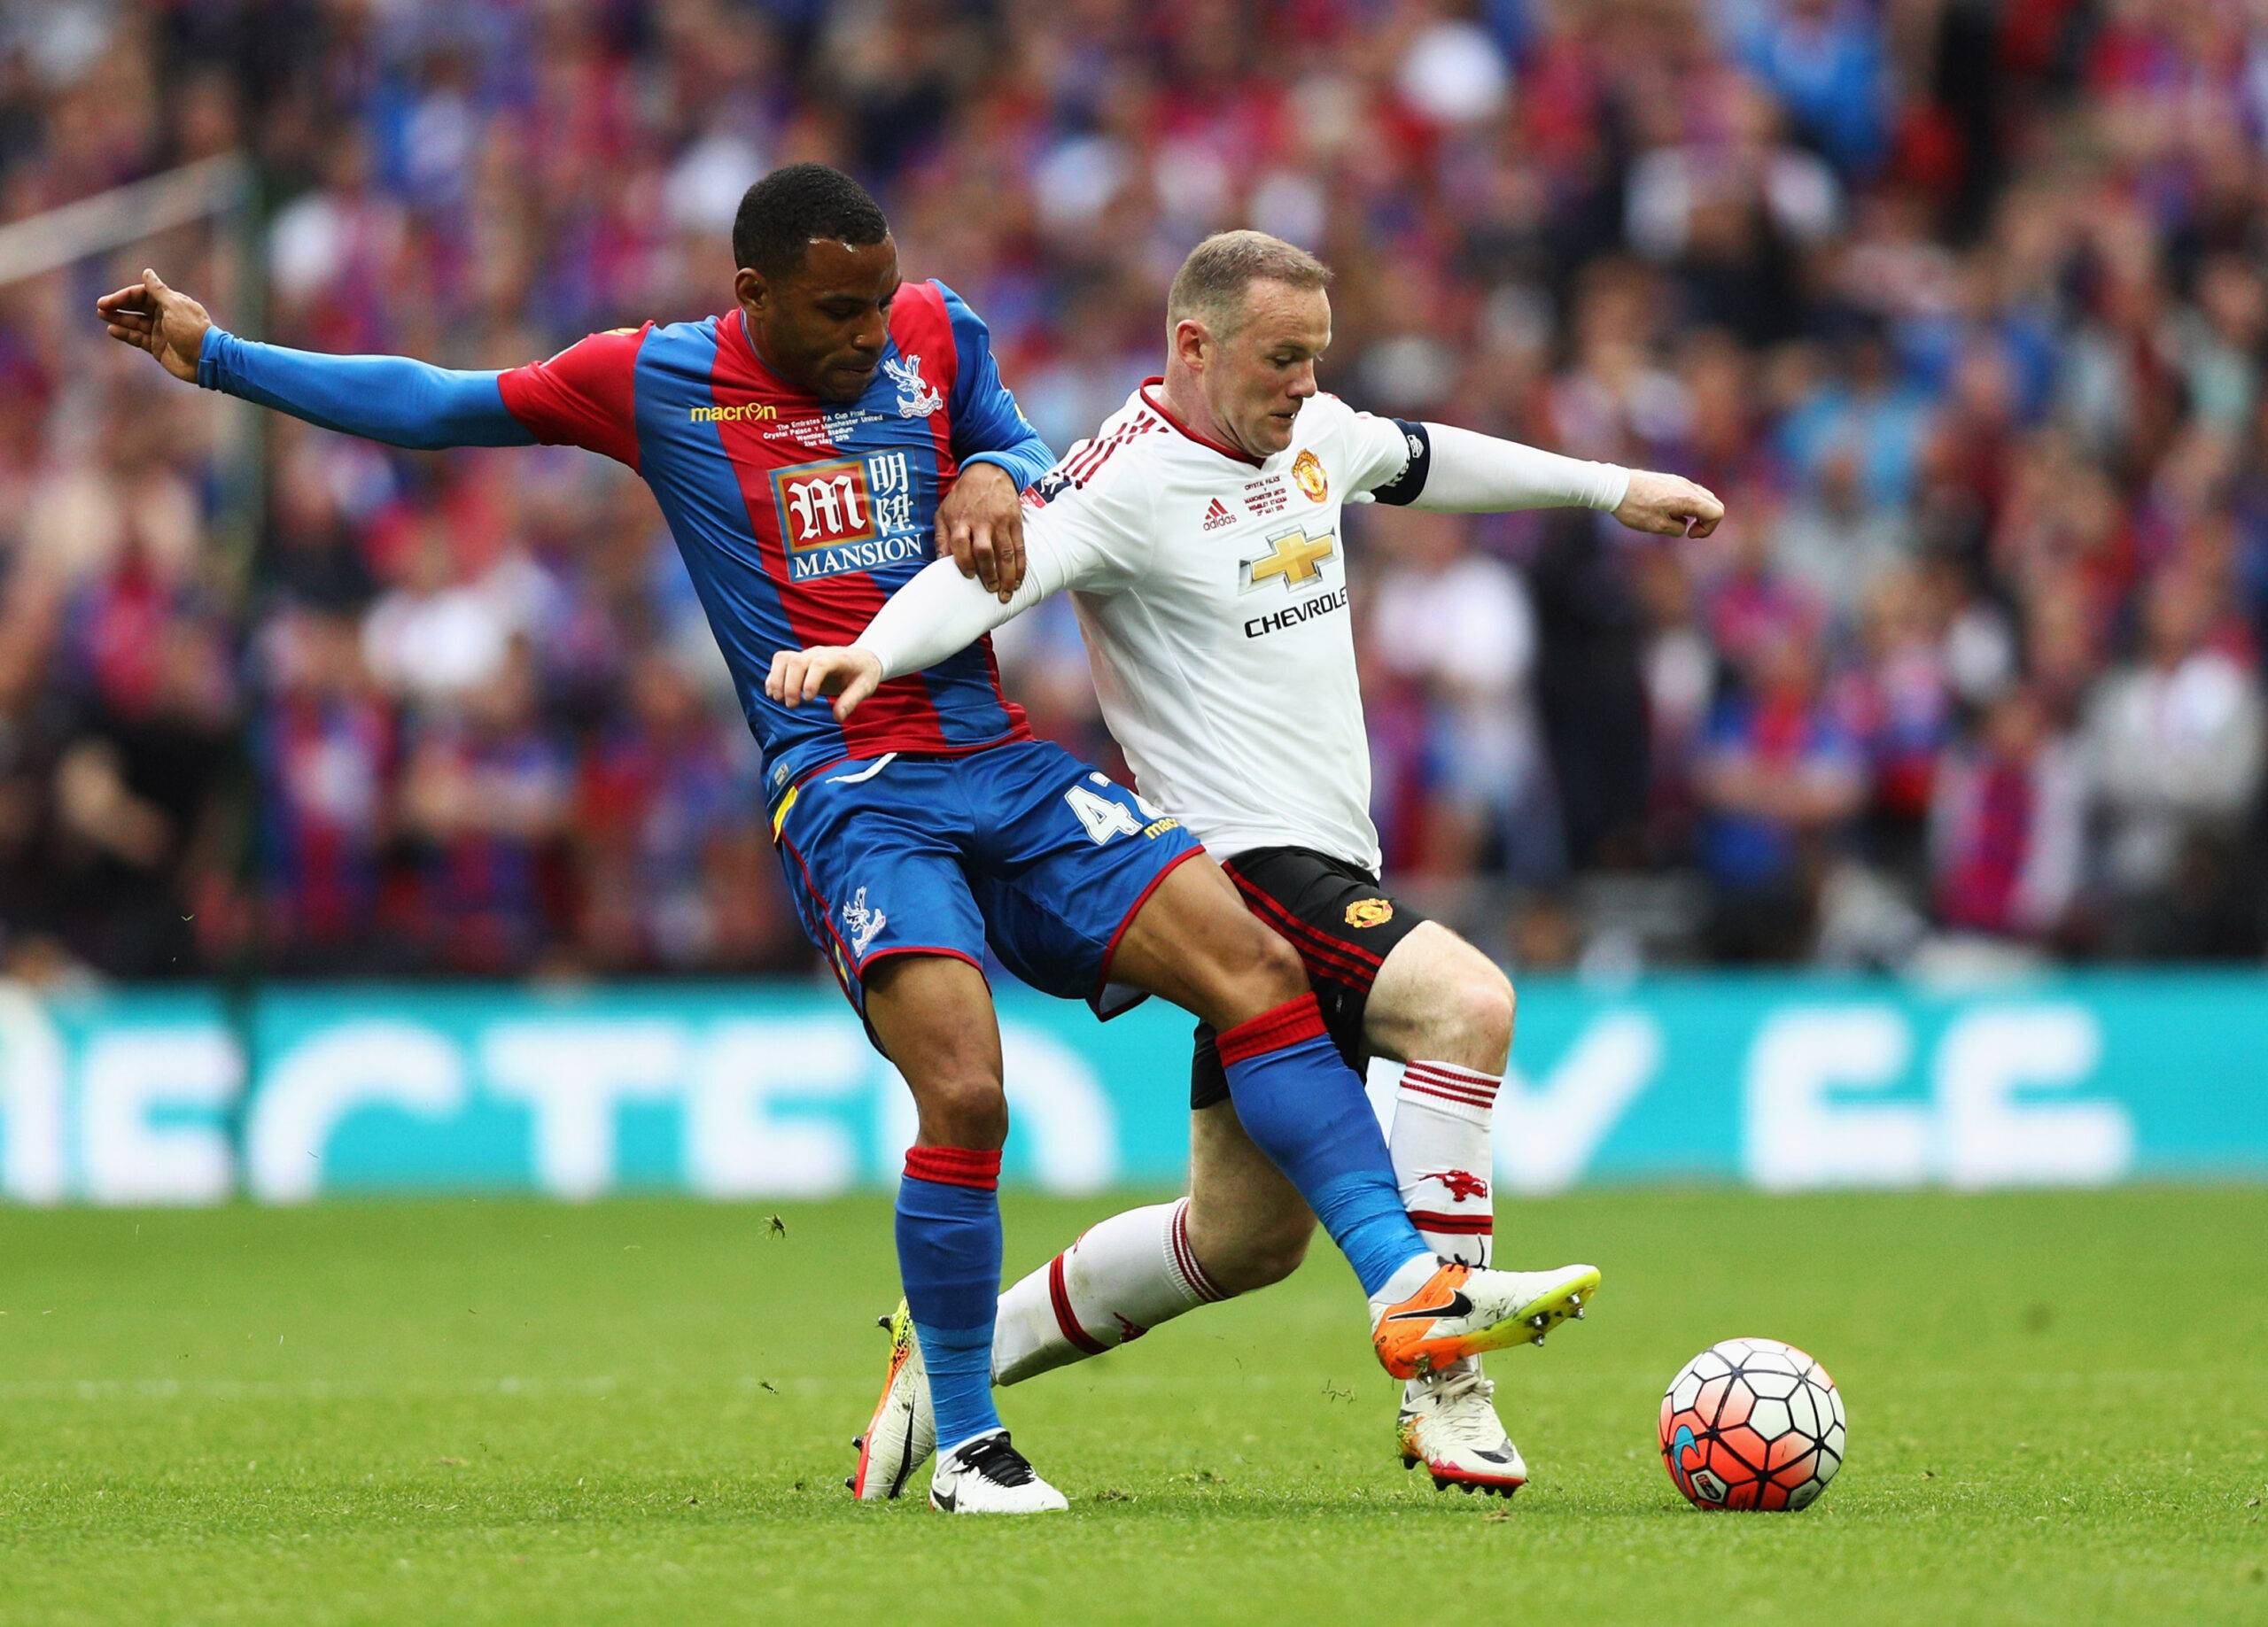 Wayne Rooney in action vs Crystal Palace